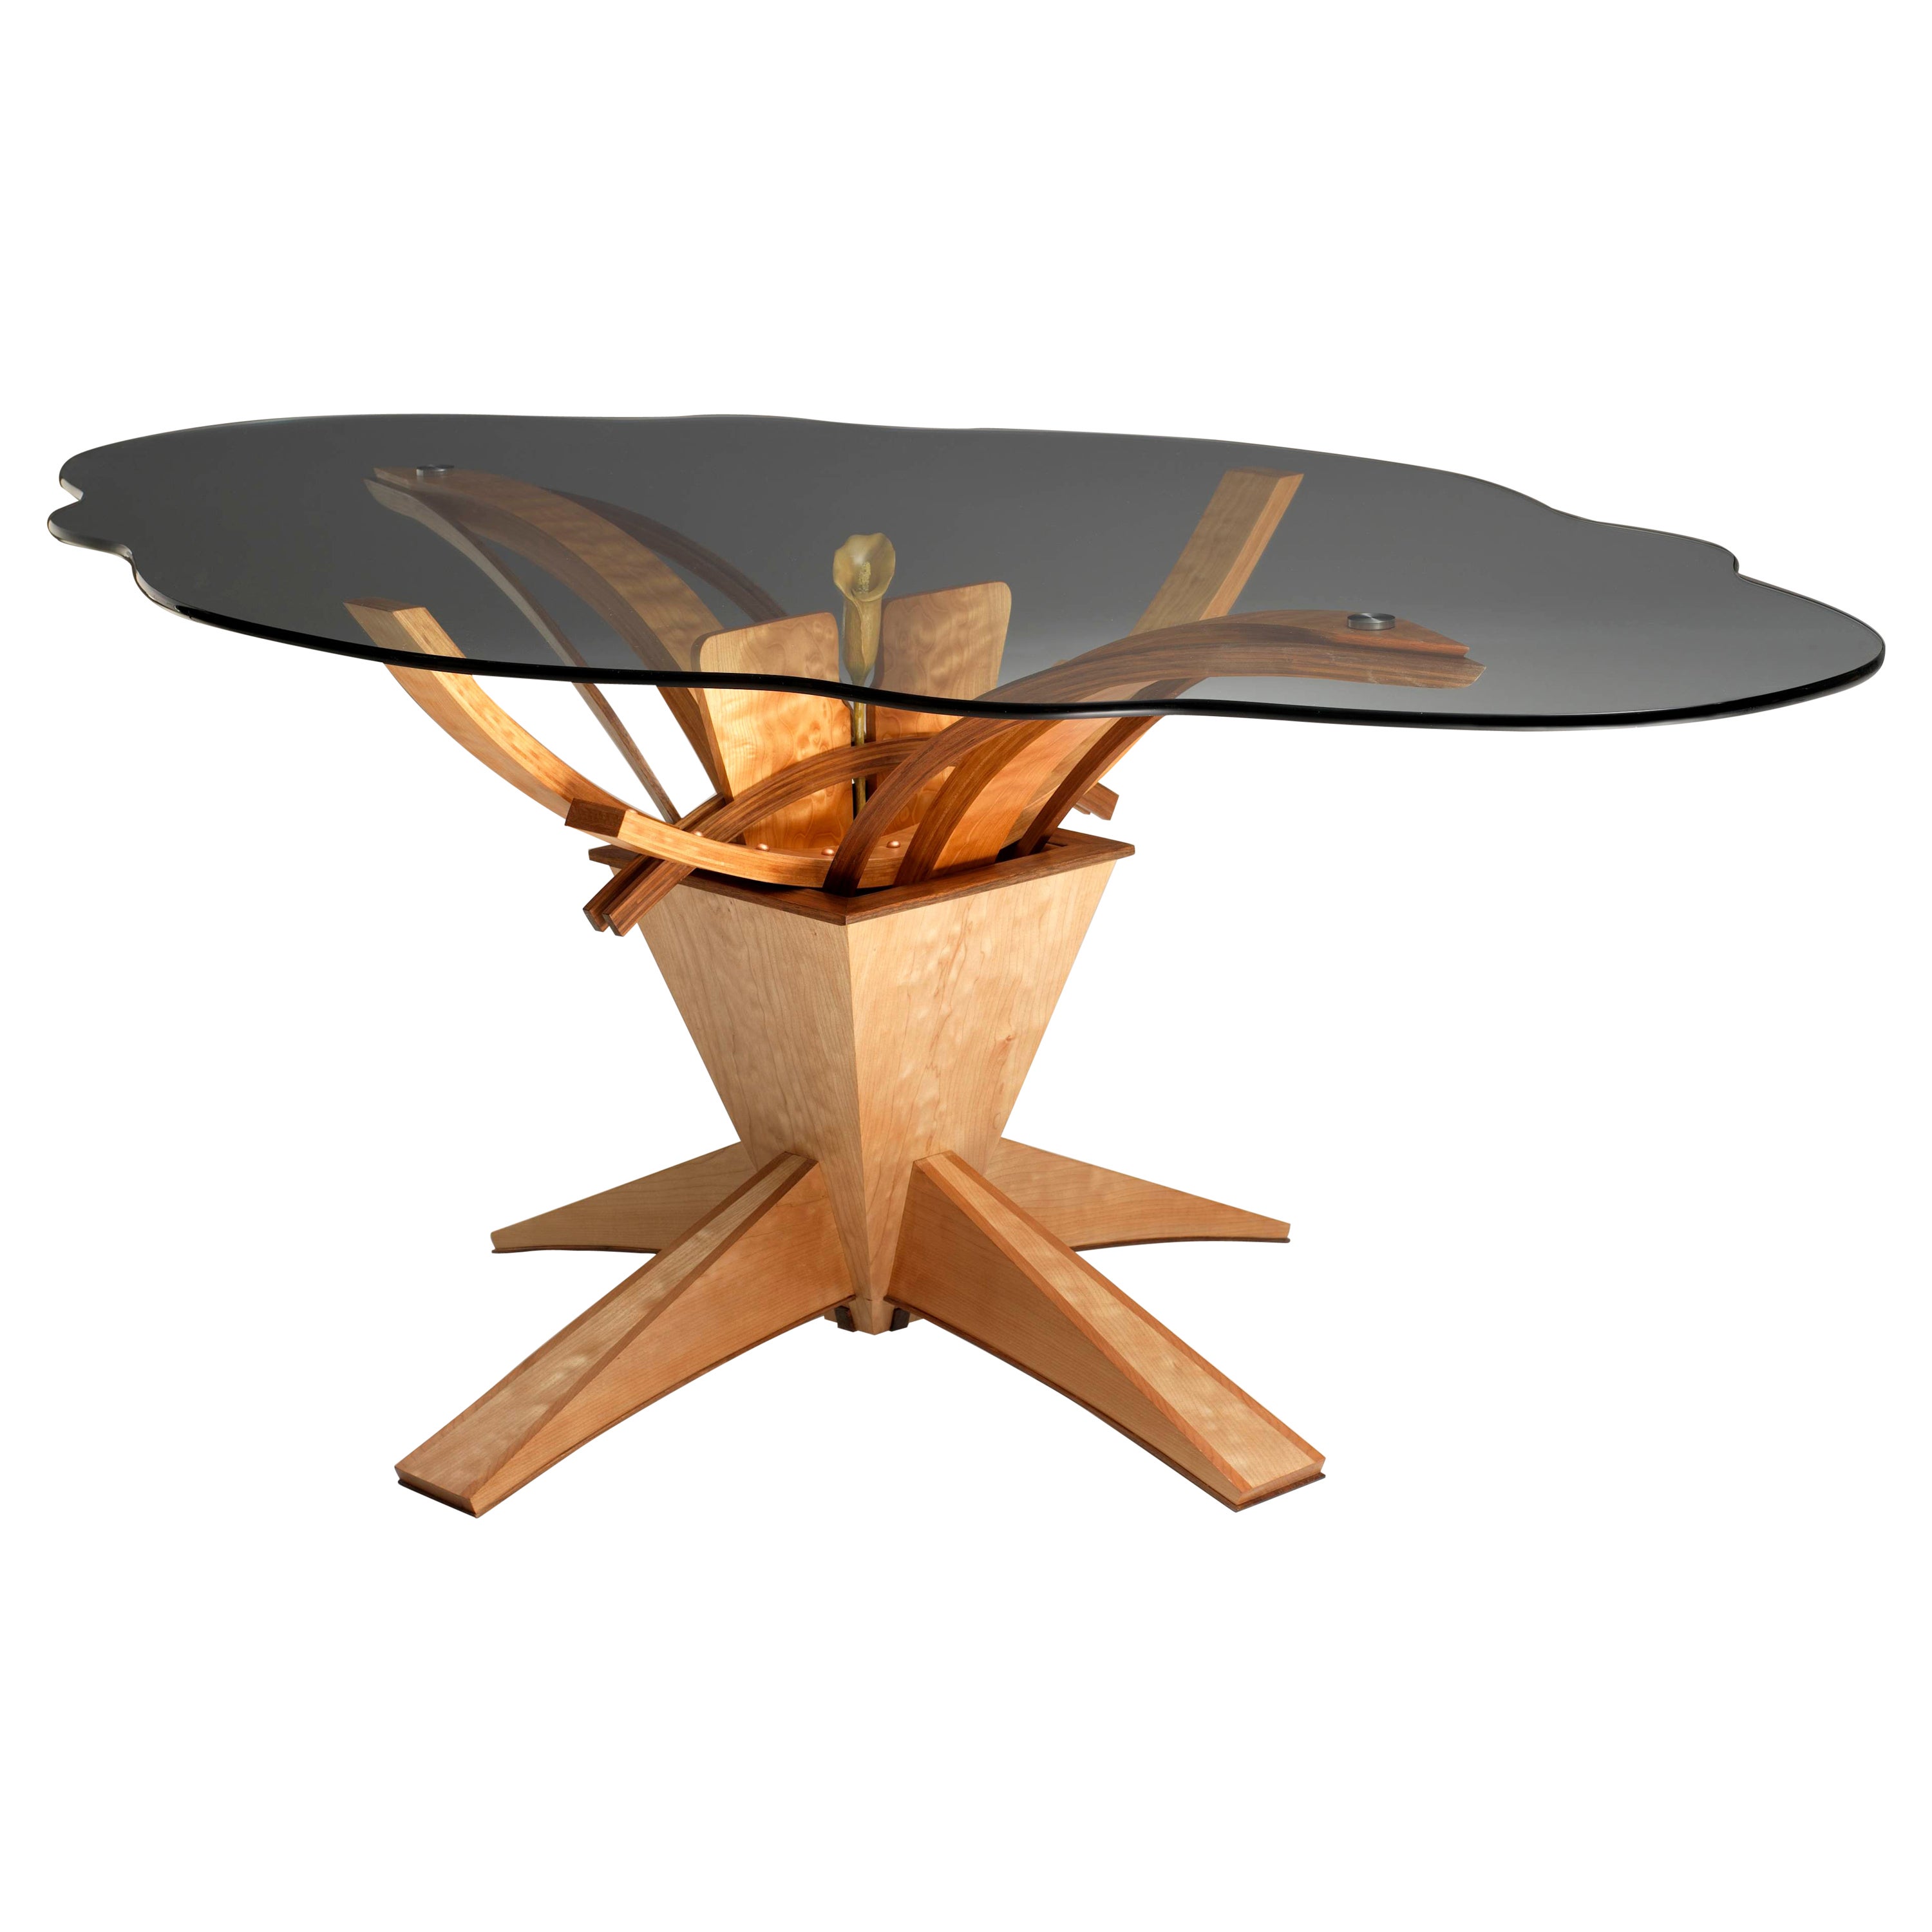 Ikebana Inspired Calla Lily Dining Table; Made with Maple, Walnut, Glass Top For Sale